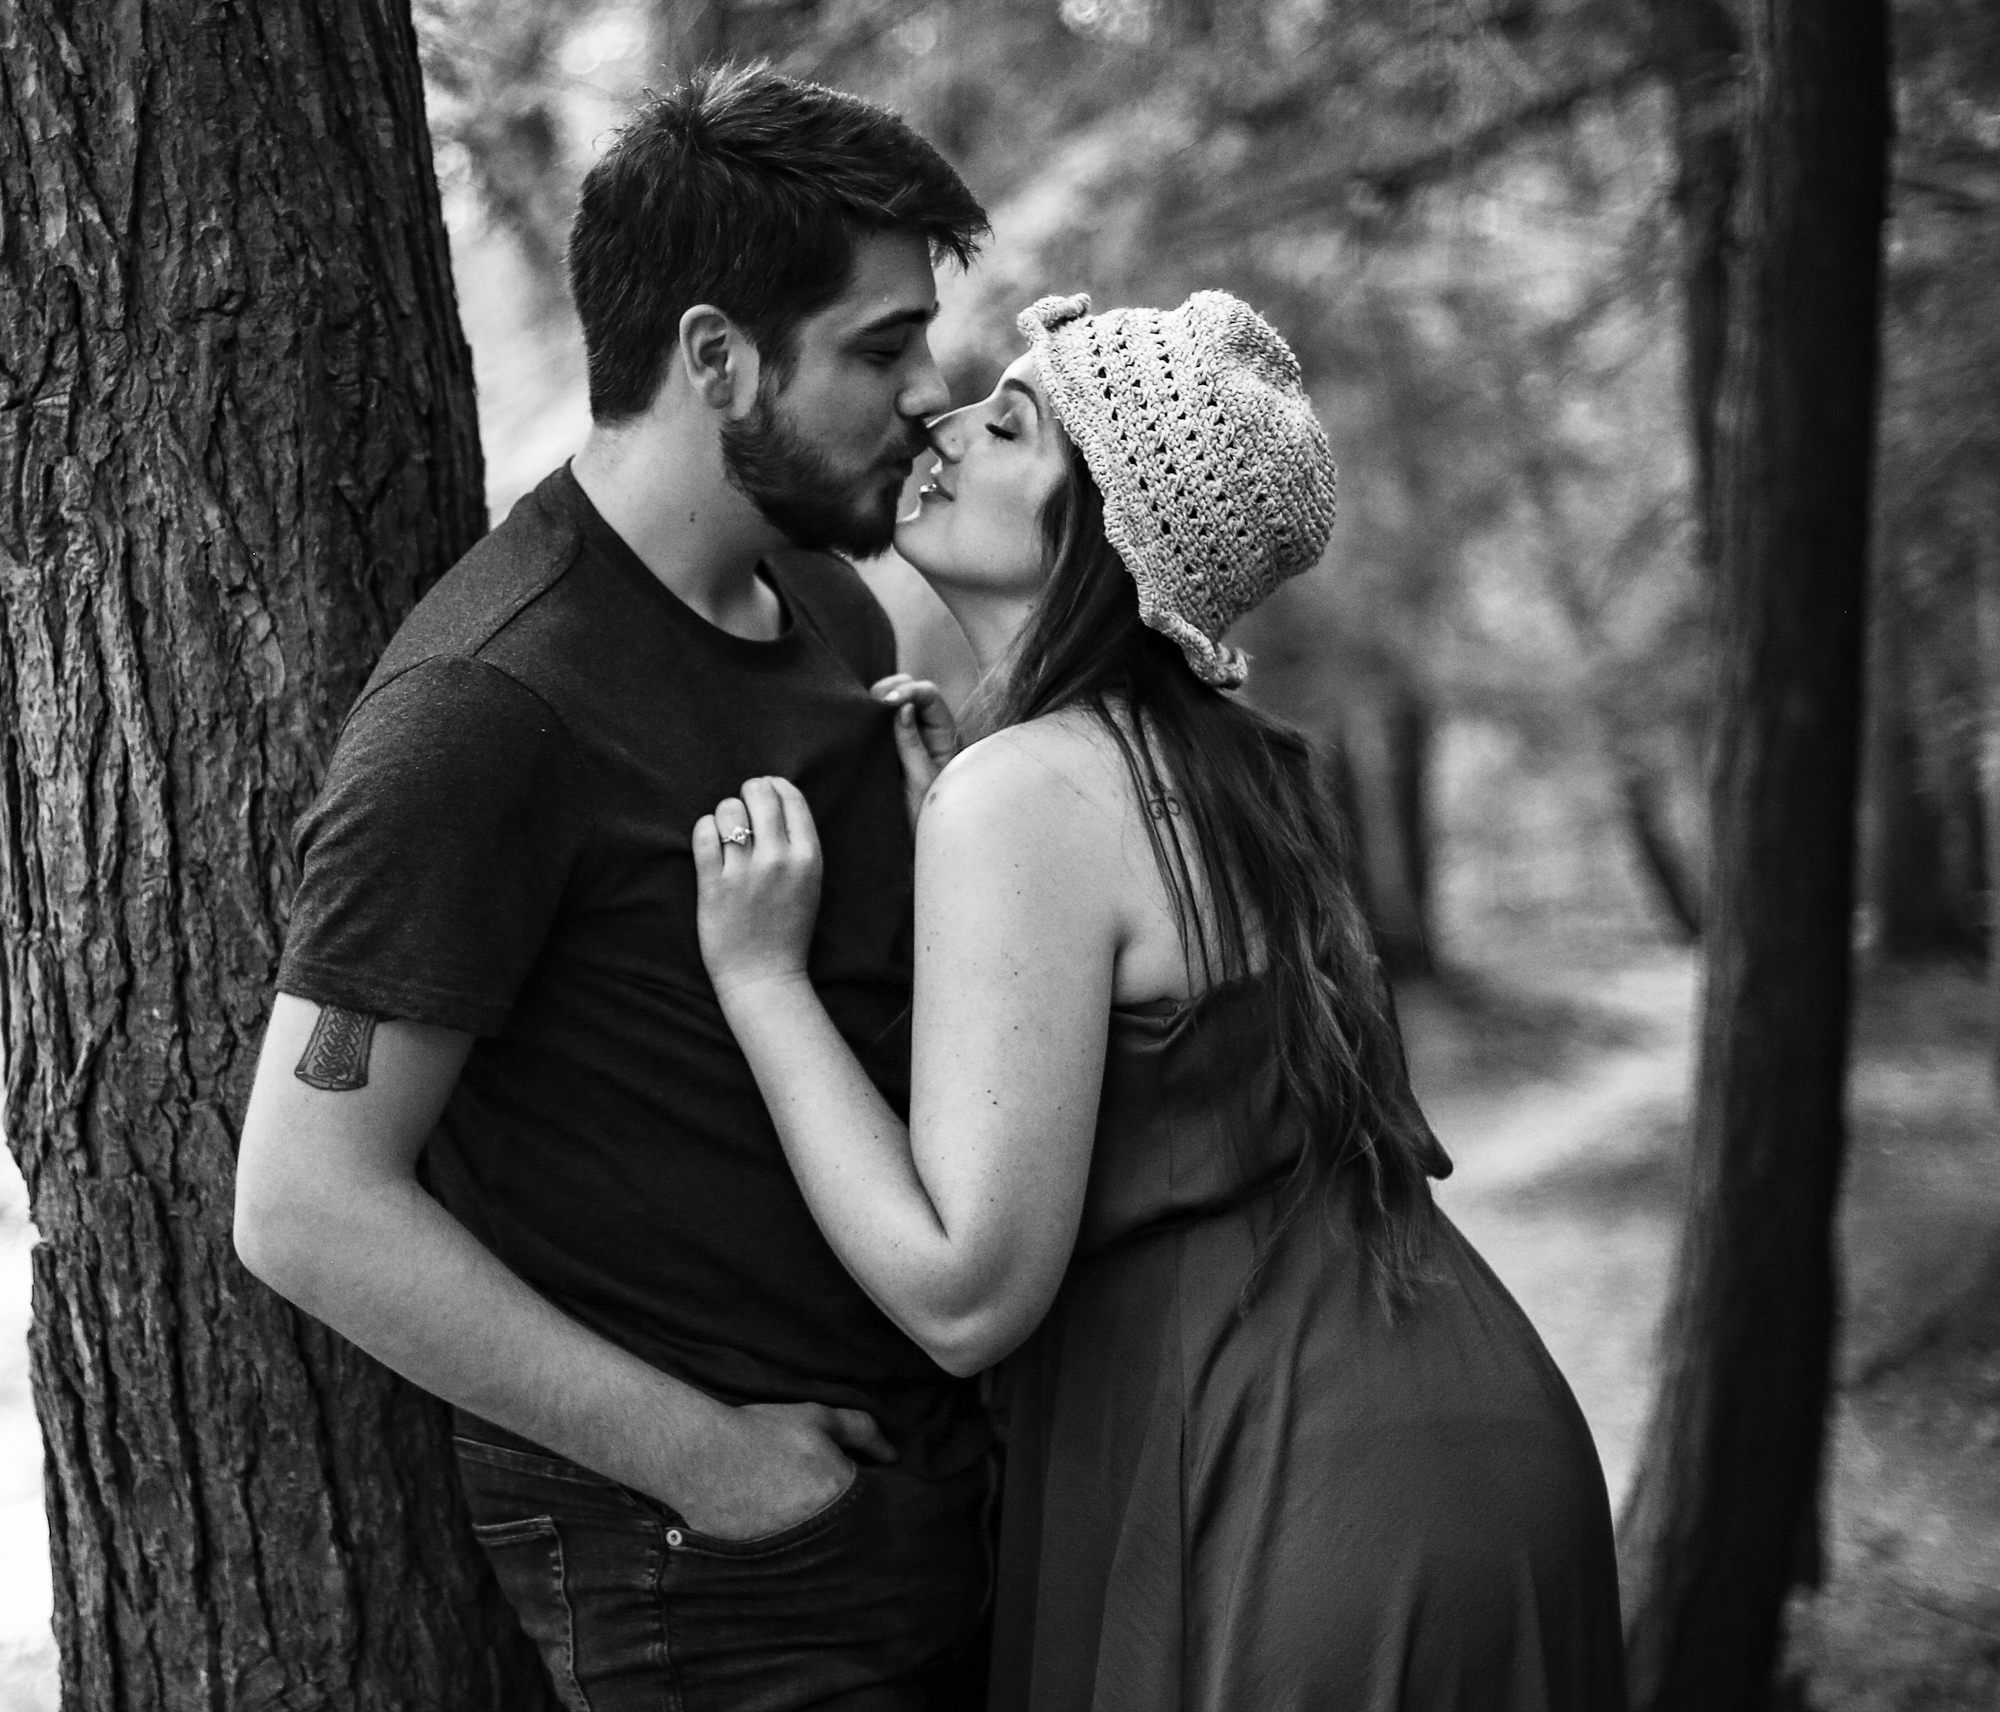 During engagement photos at Wintergreen Gorge woman leans in to kiss man leaning against a tree